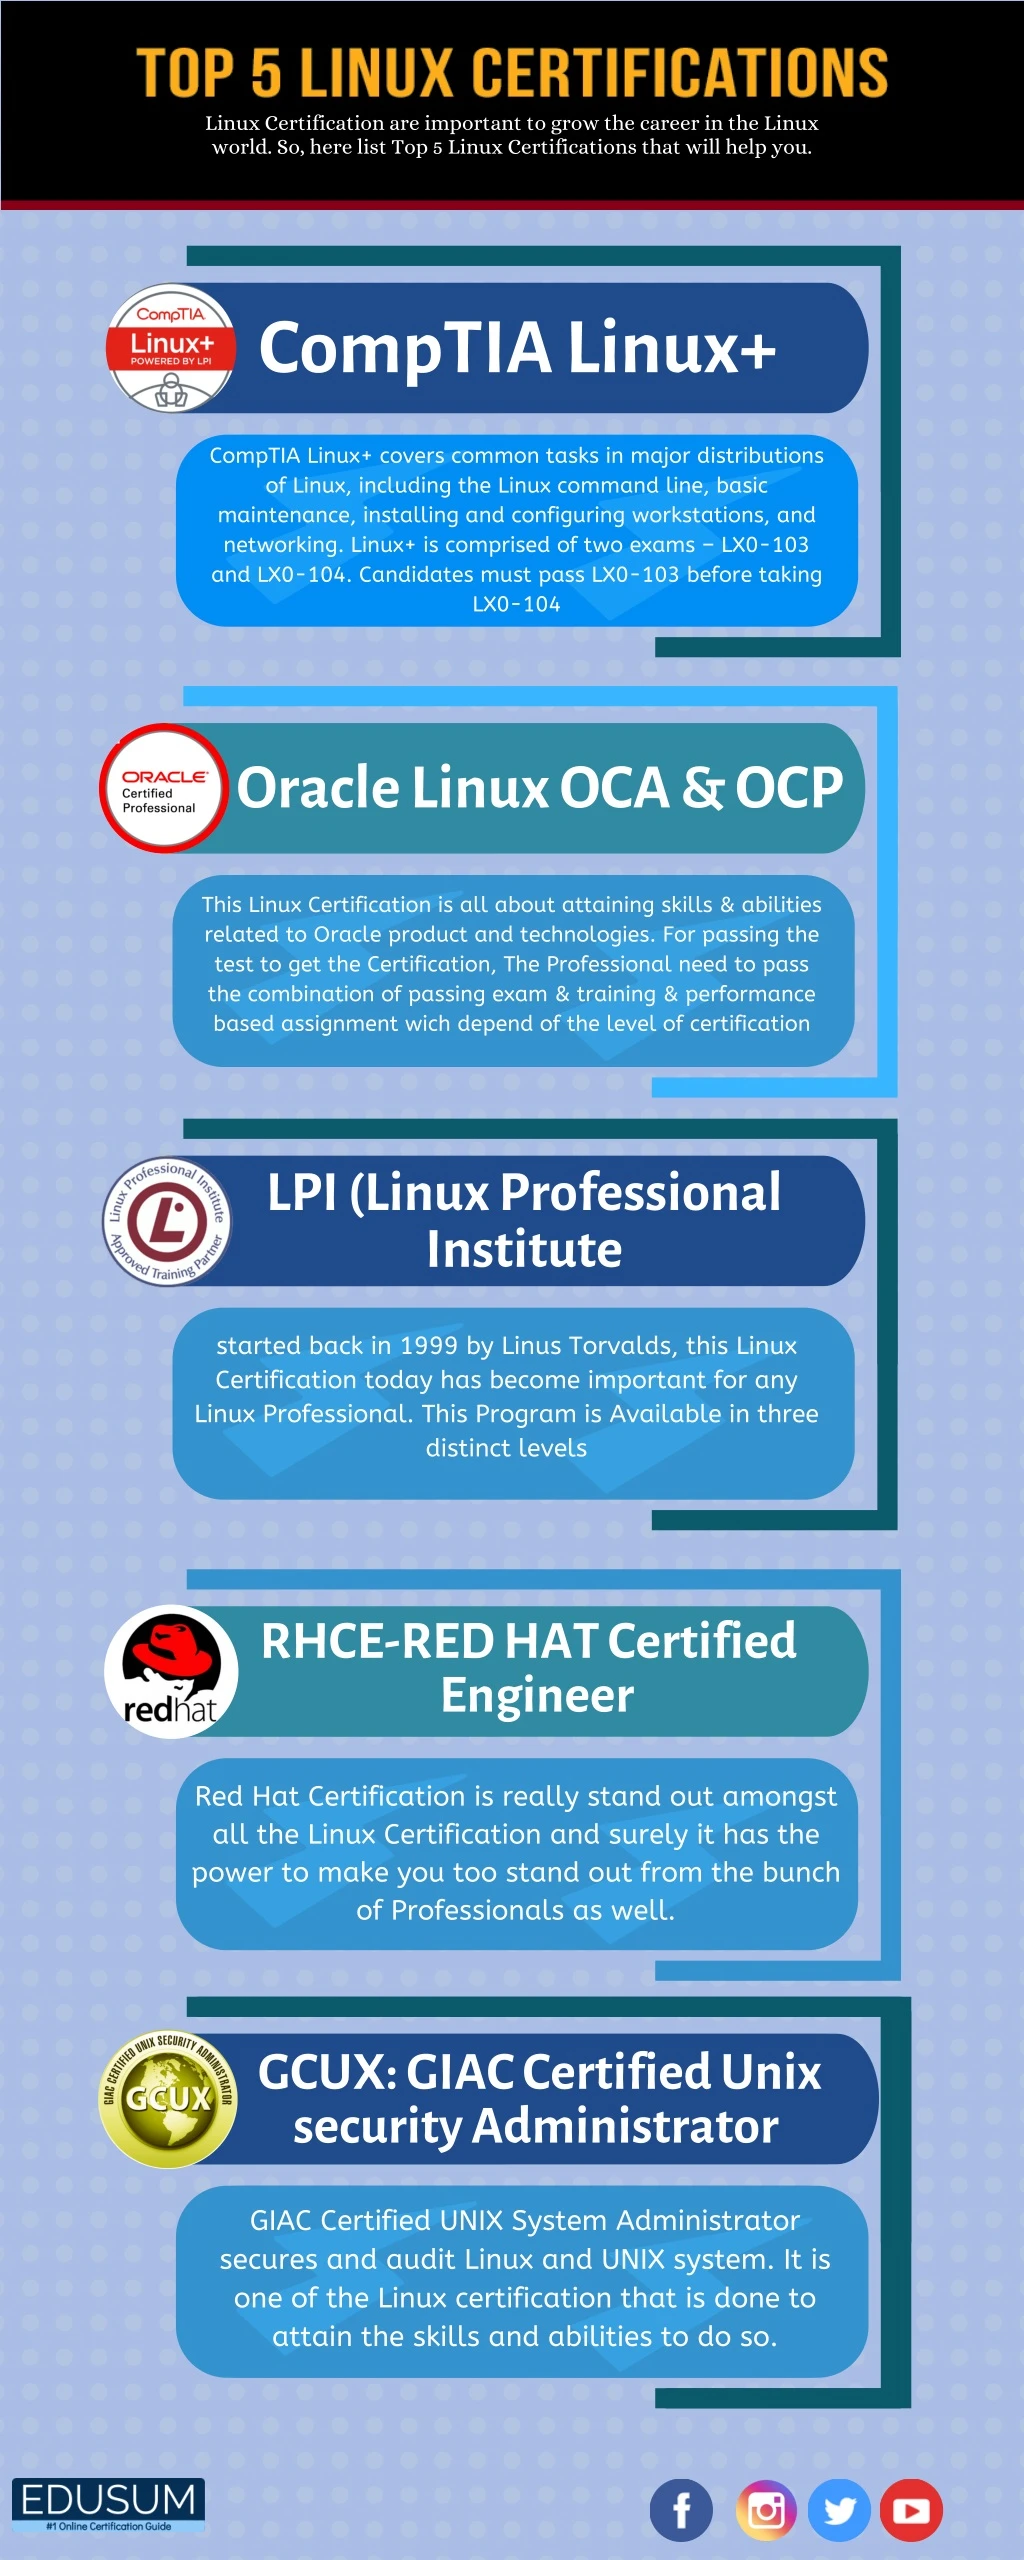 linux certification are important to grow